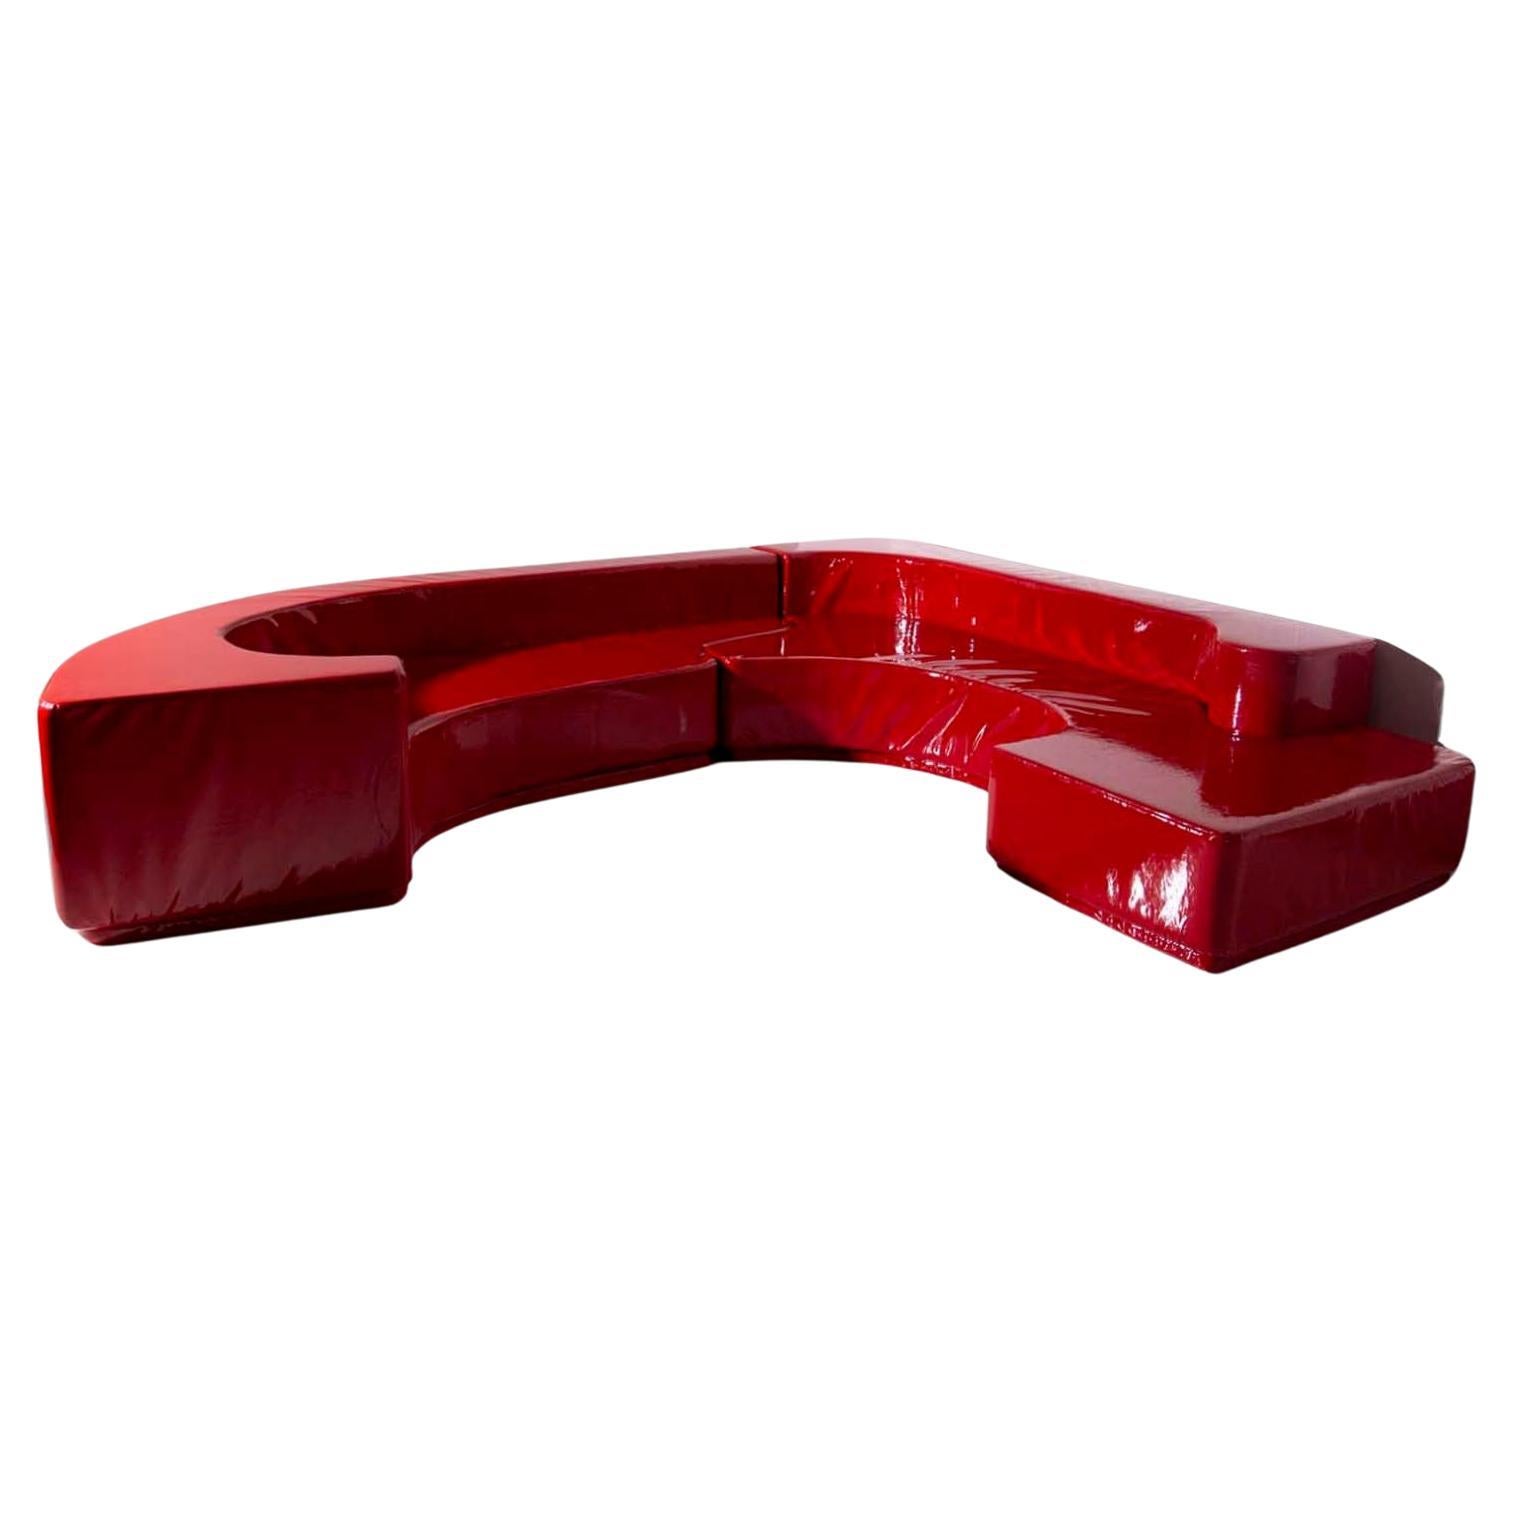 Italian Red Sofa "Lara" Designed by N. Massari, R. Pamio, R. Toso from 1968 For Sale